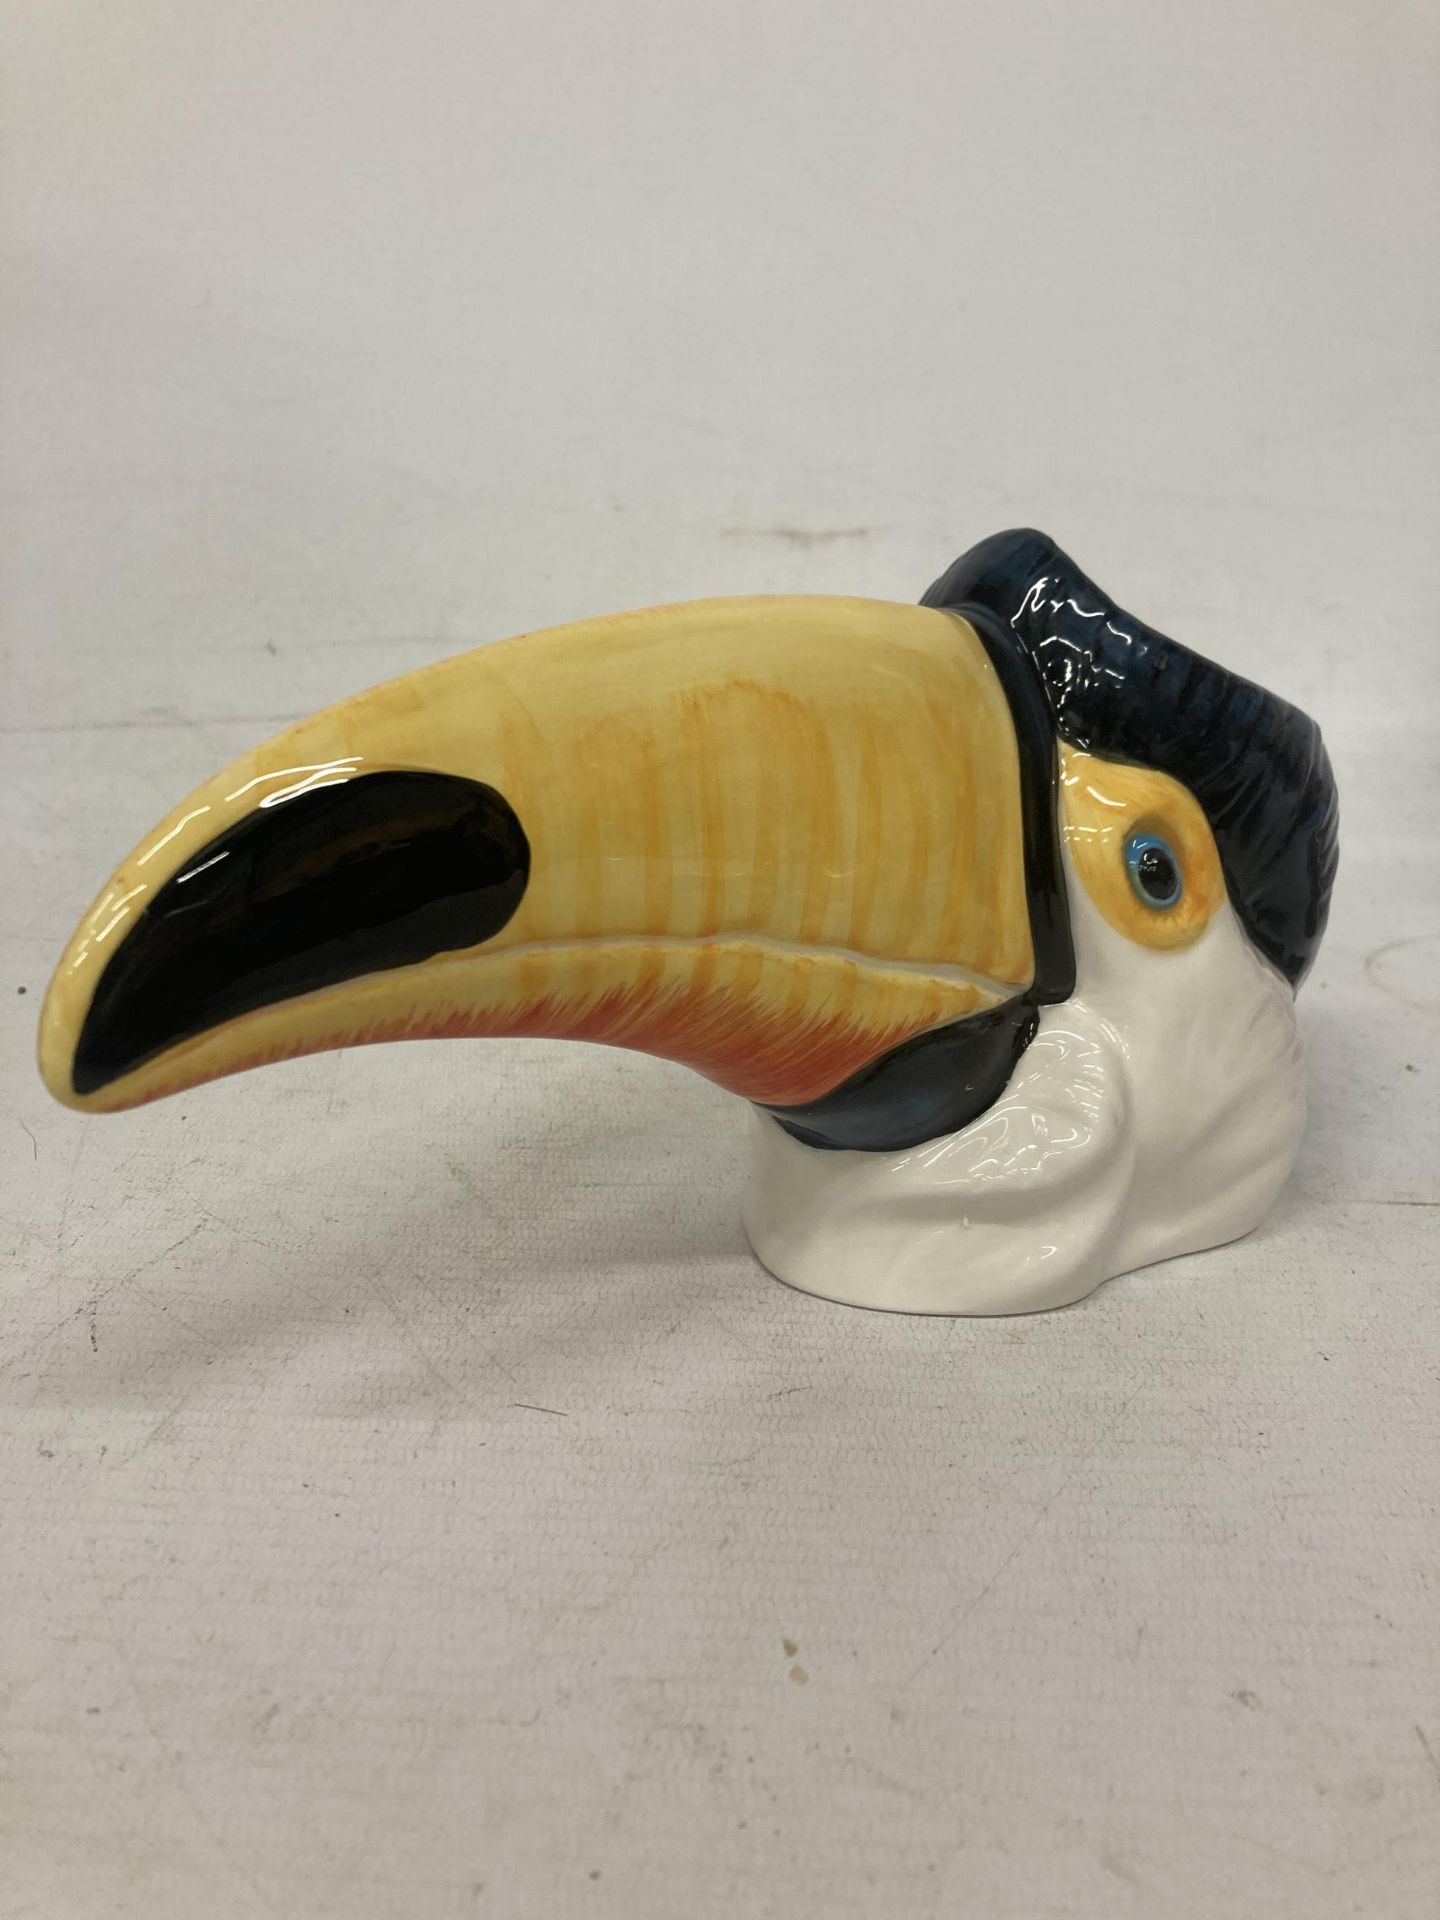 A TOUCAN HEAD BY DRAGONFLY MANUFACTURING DESIGNED BY JACK GRAHAM